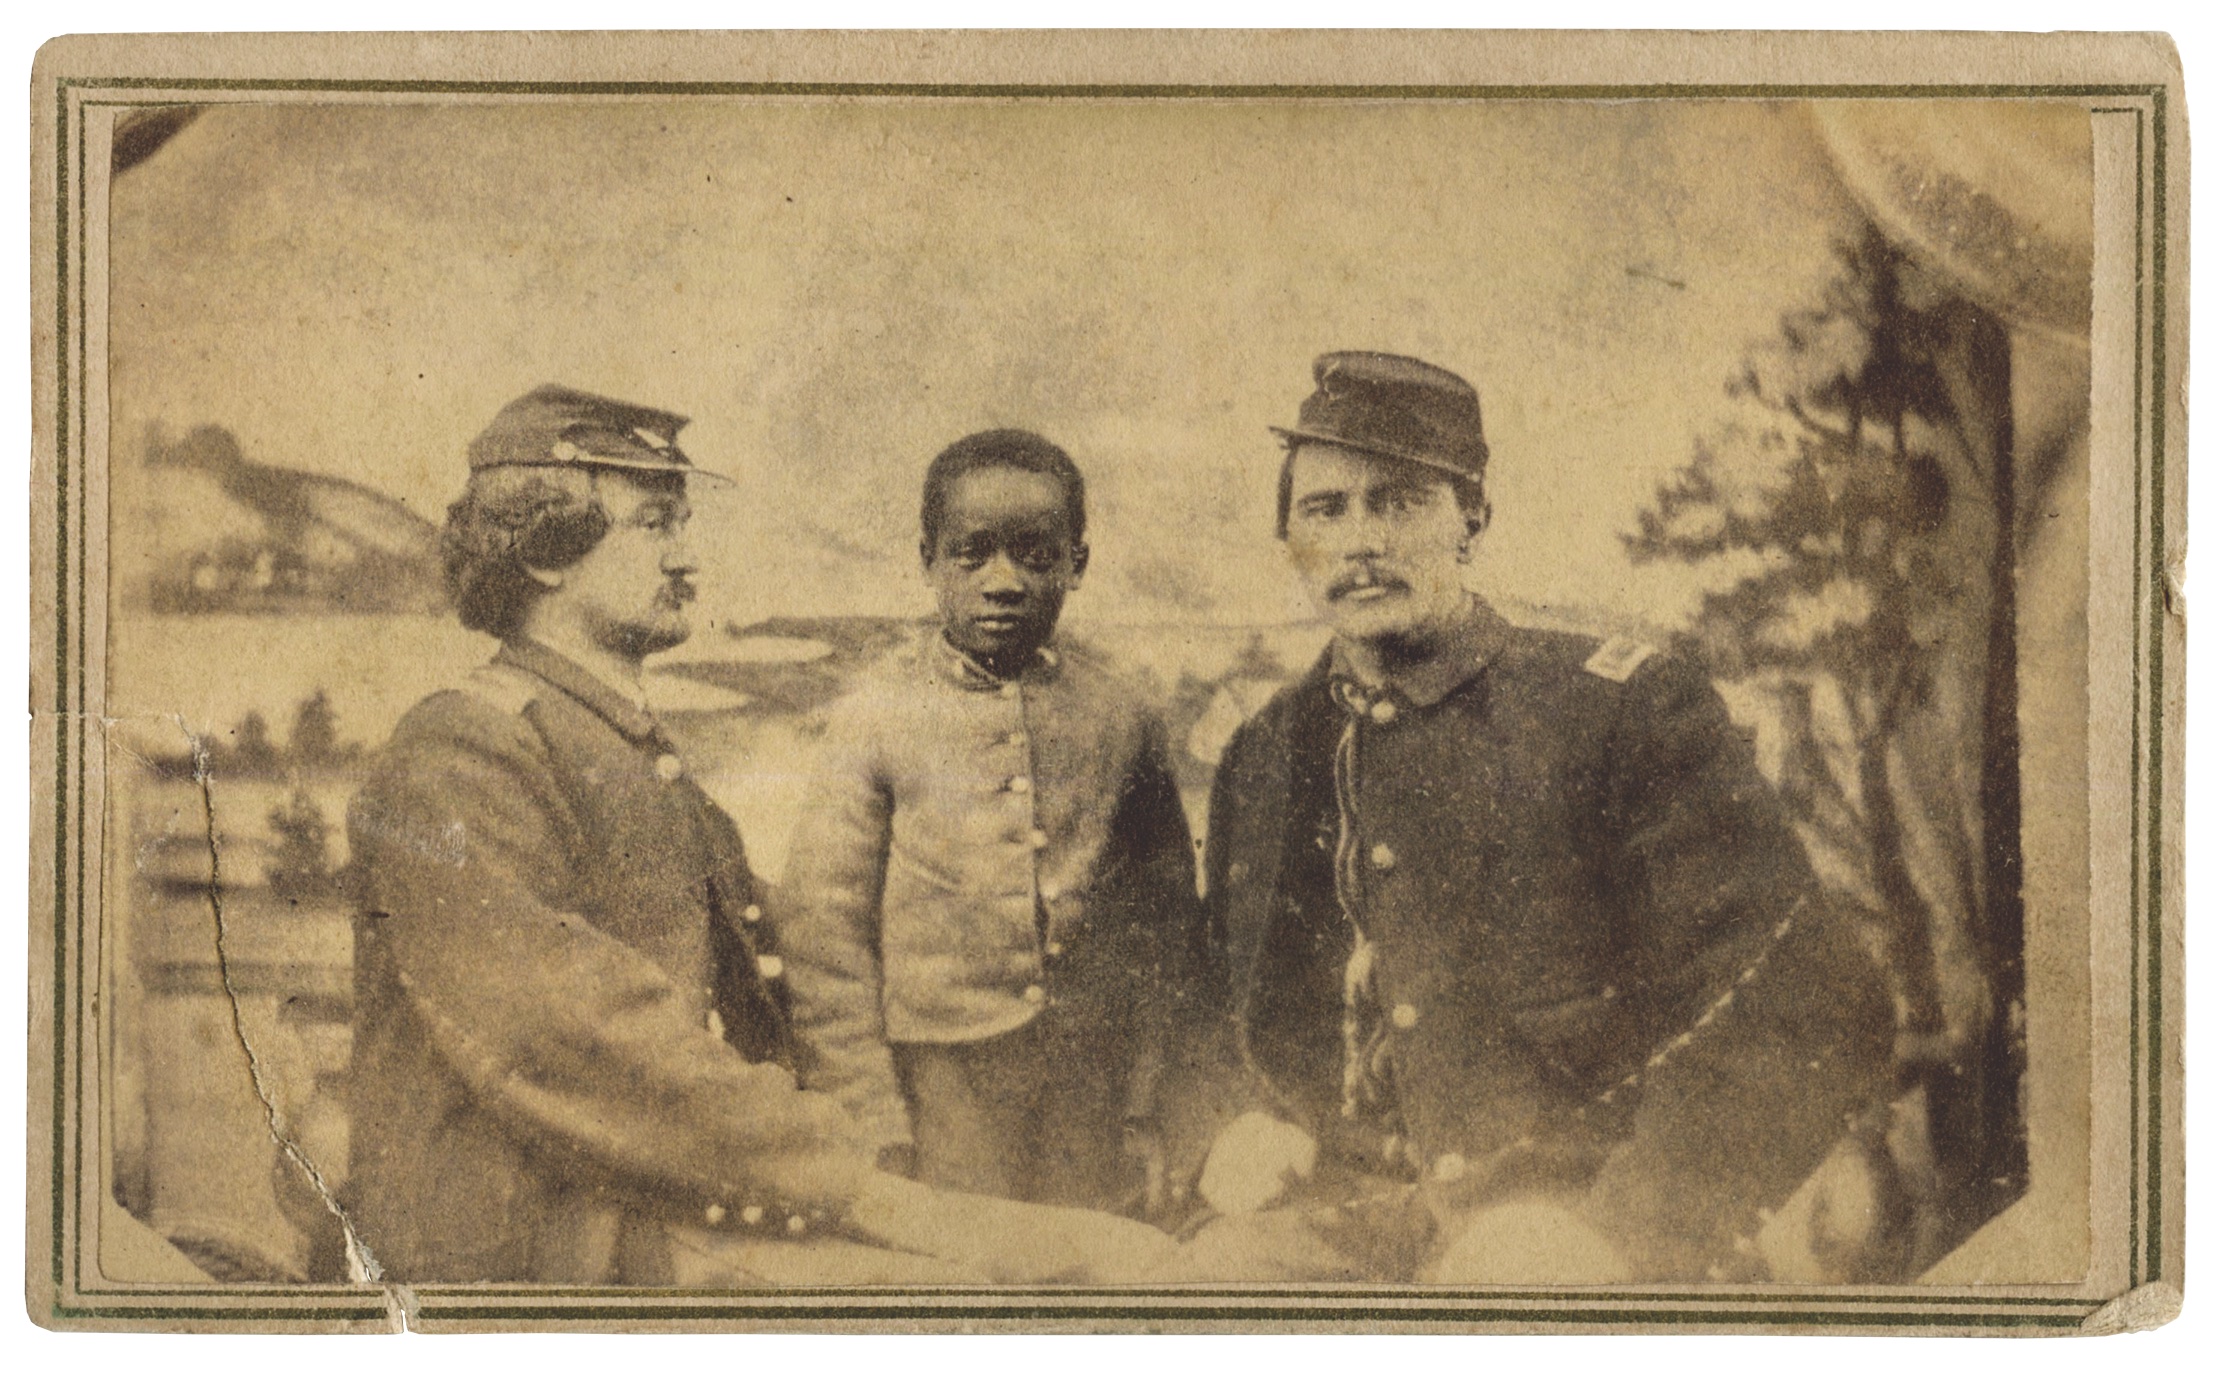 A refugee child whose life was forever altered by the war poses with two Union officers. (American Heritage Auctions, Adam Ochs Fleischer)